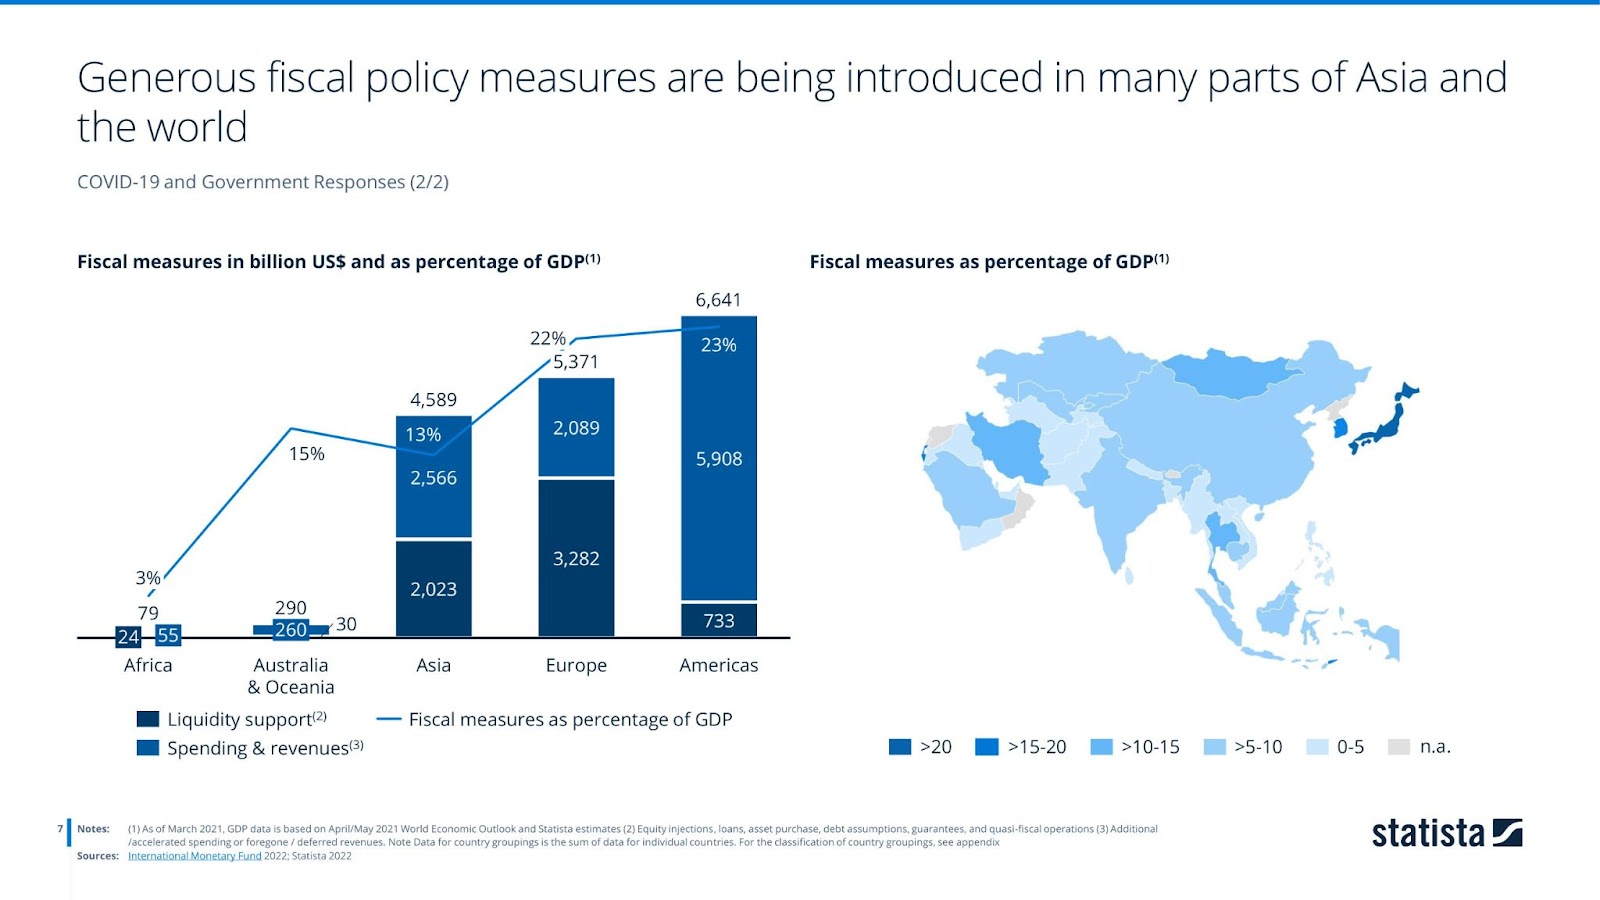 Fiscal policy measures